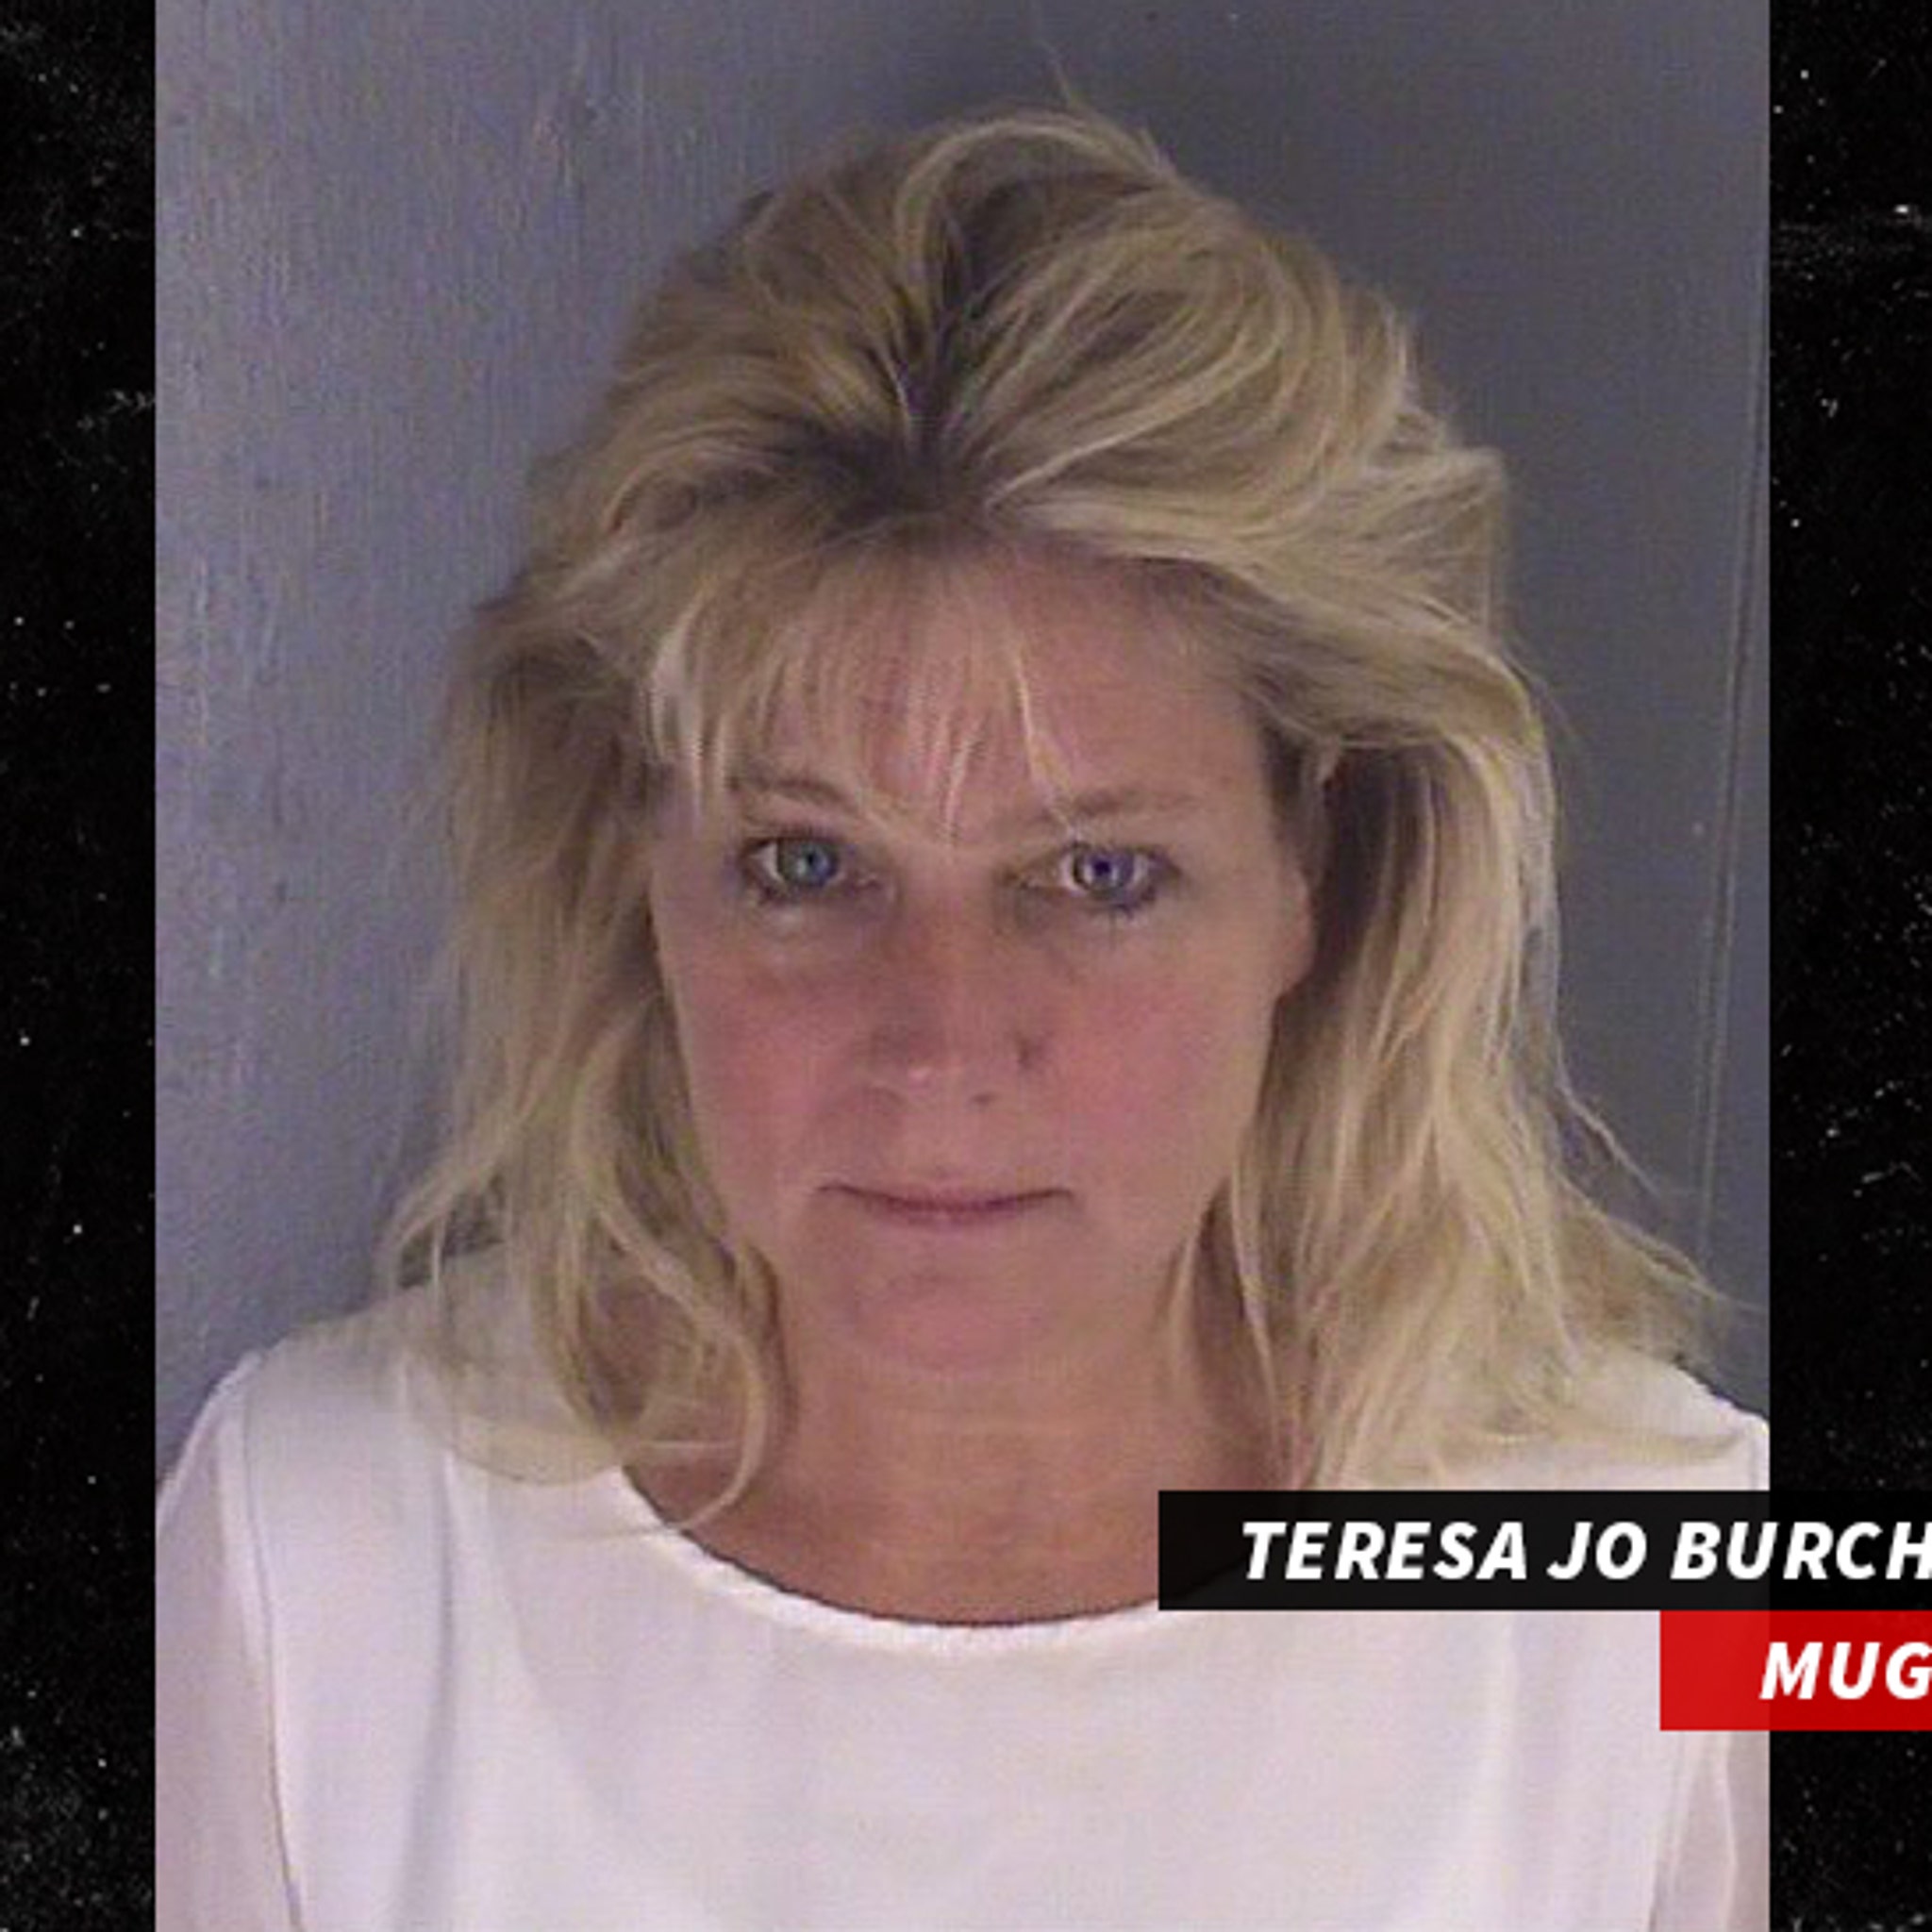 Trump Trust Attorneys Wife Busted Having Sex with a Jail Inmate pic